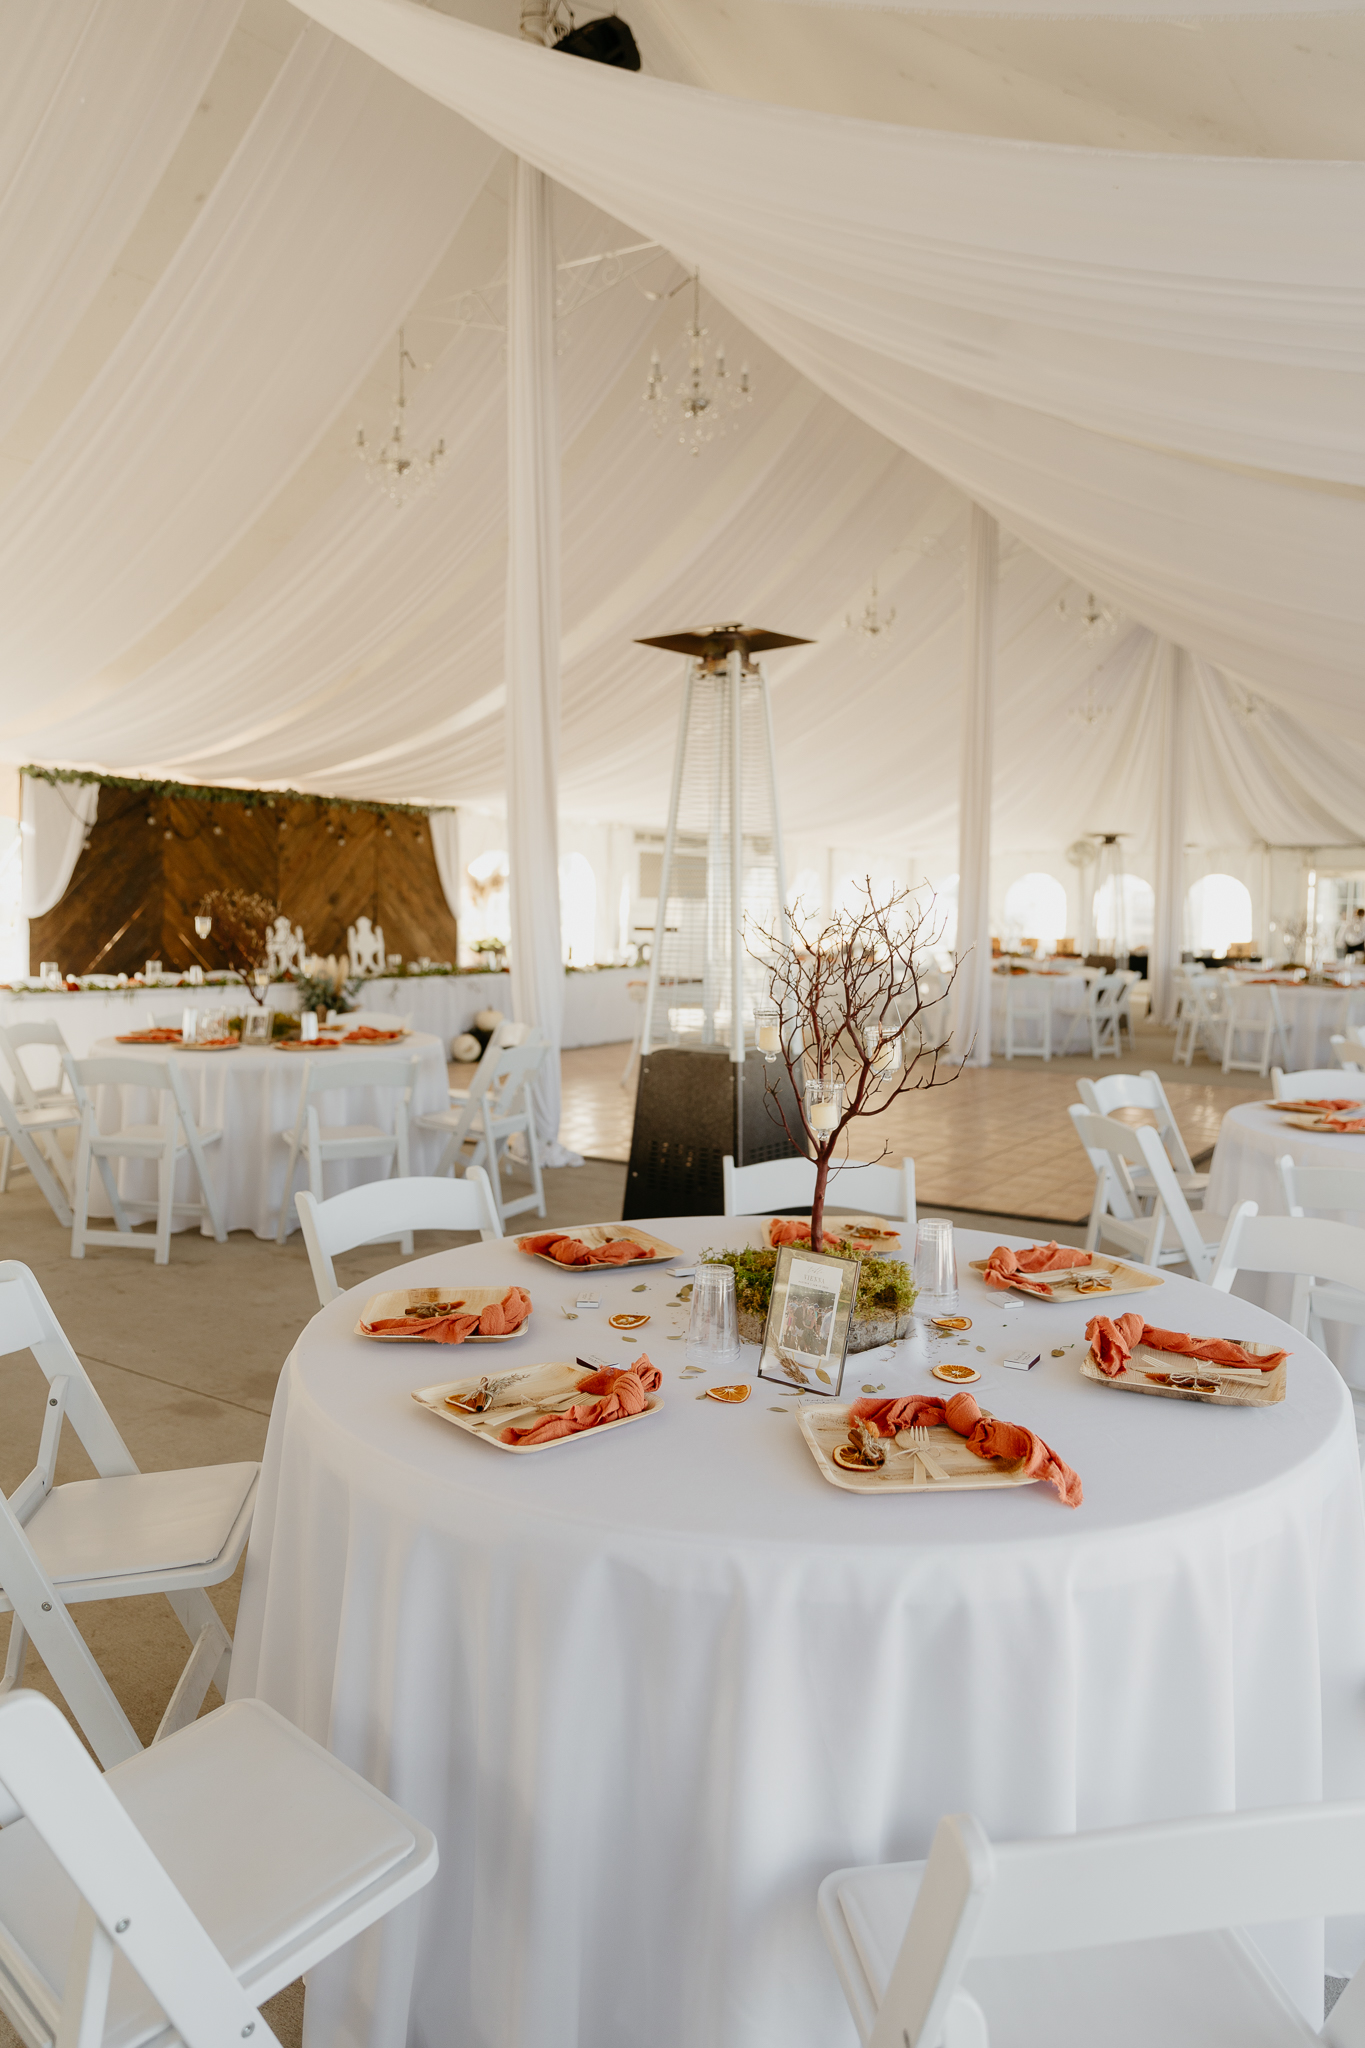 Wedding decorations and tables in a large white tent